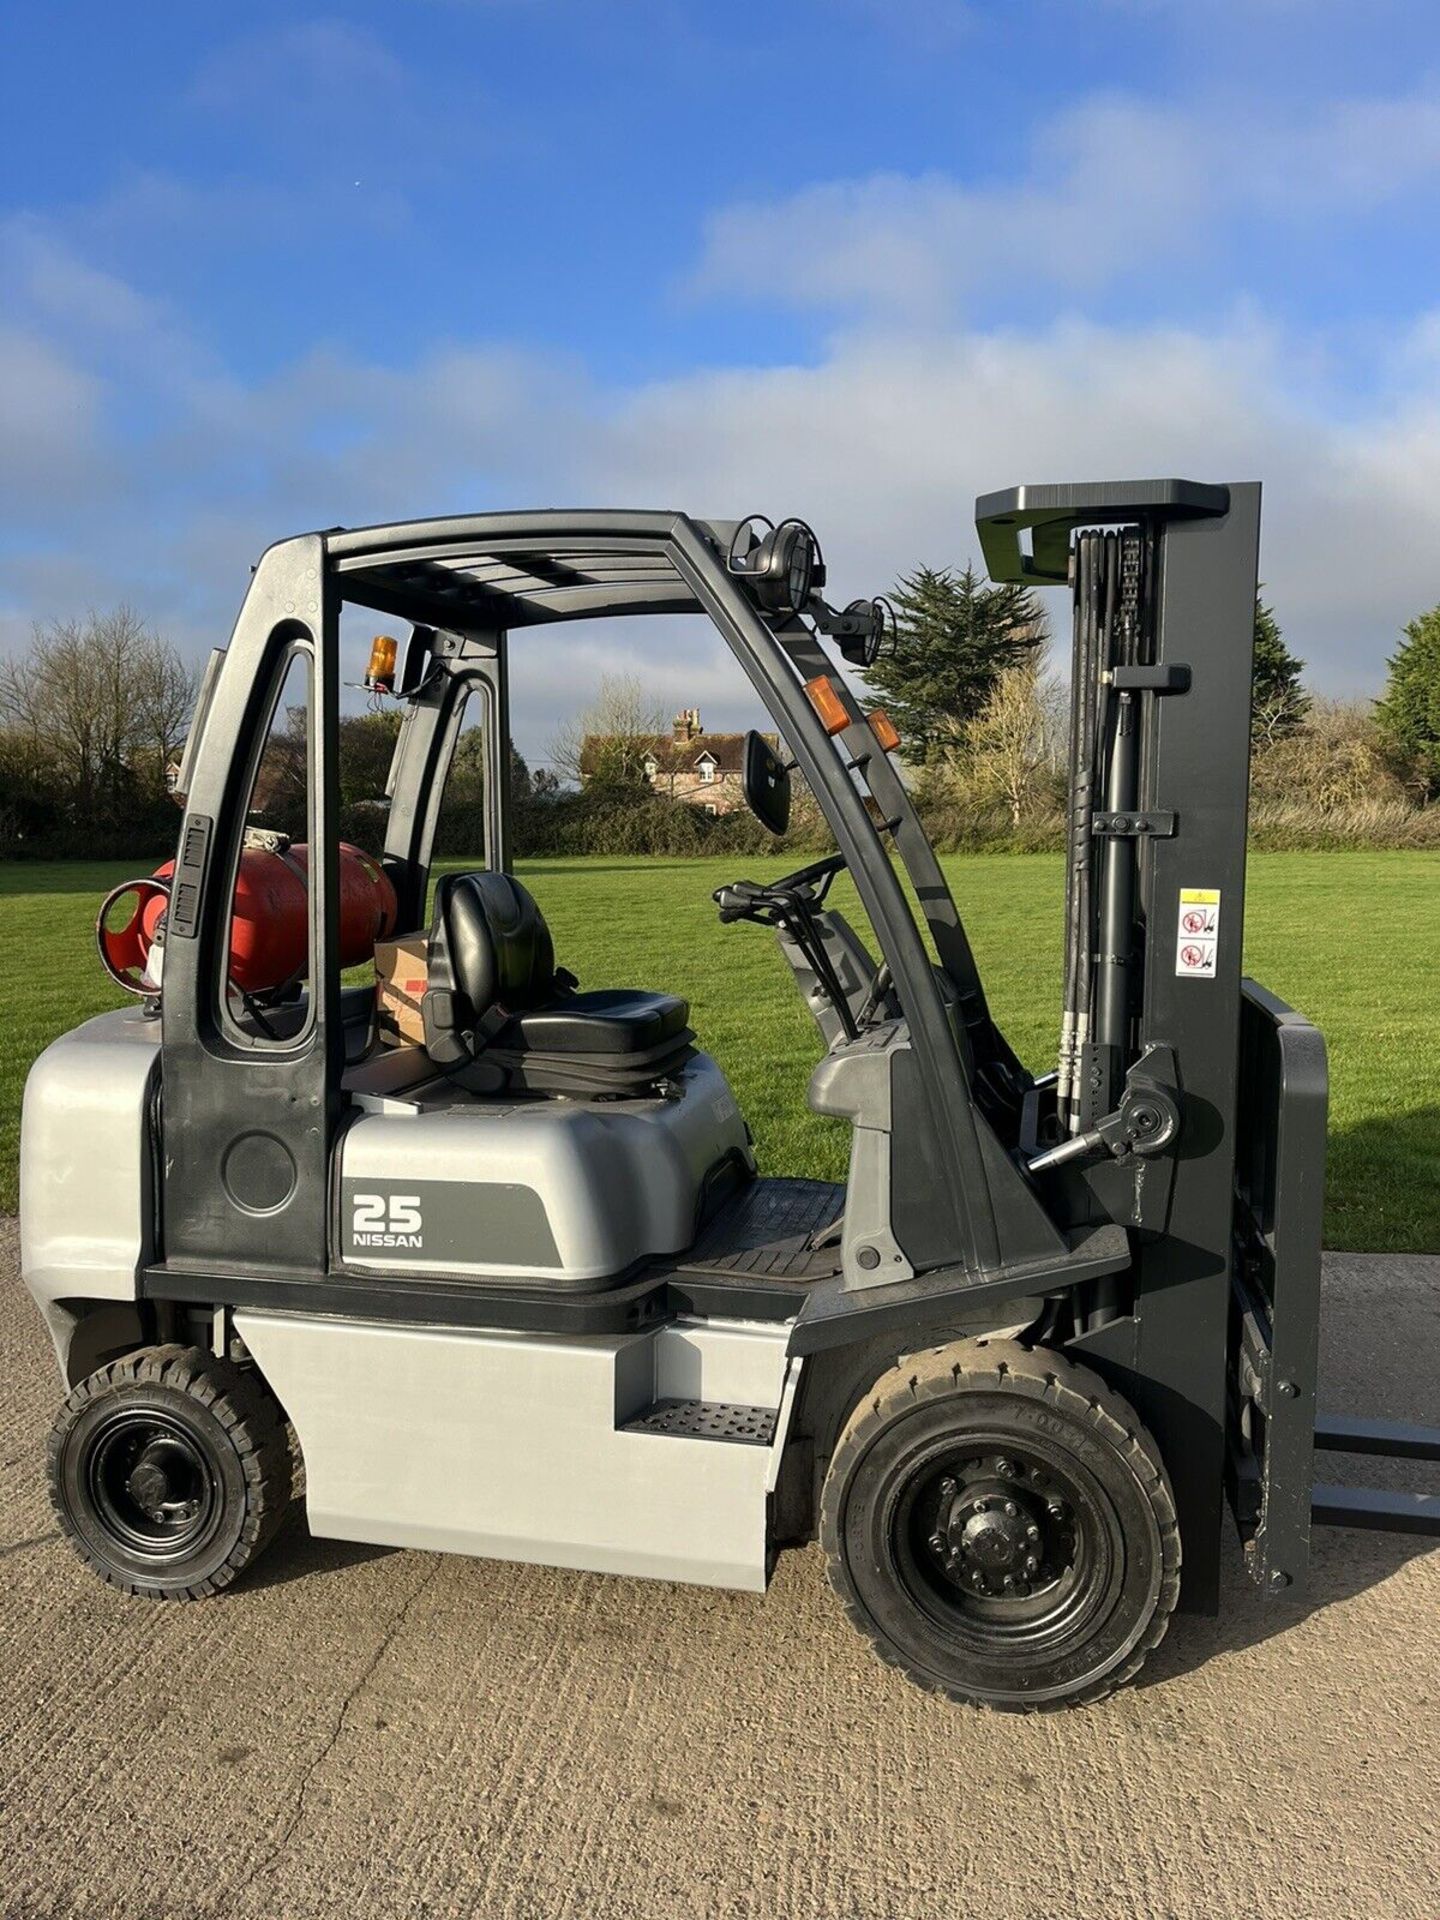 2015 - NISSAN 2.5 Gas Forklift Truck (Container Spec) - Image 3 of 5